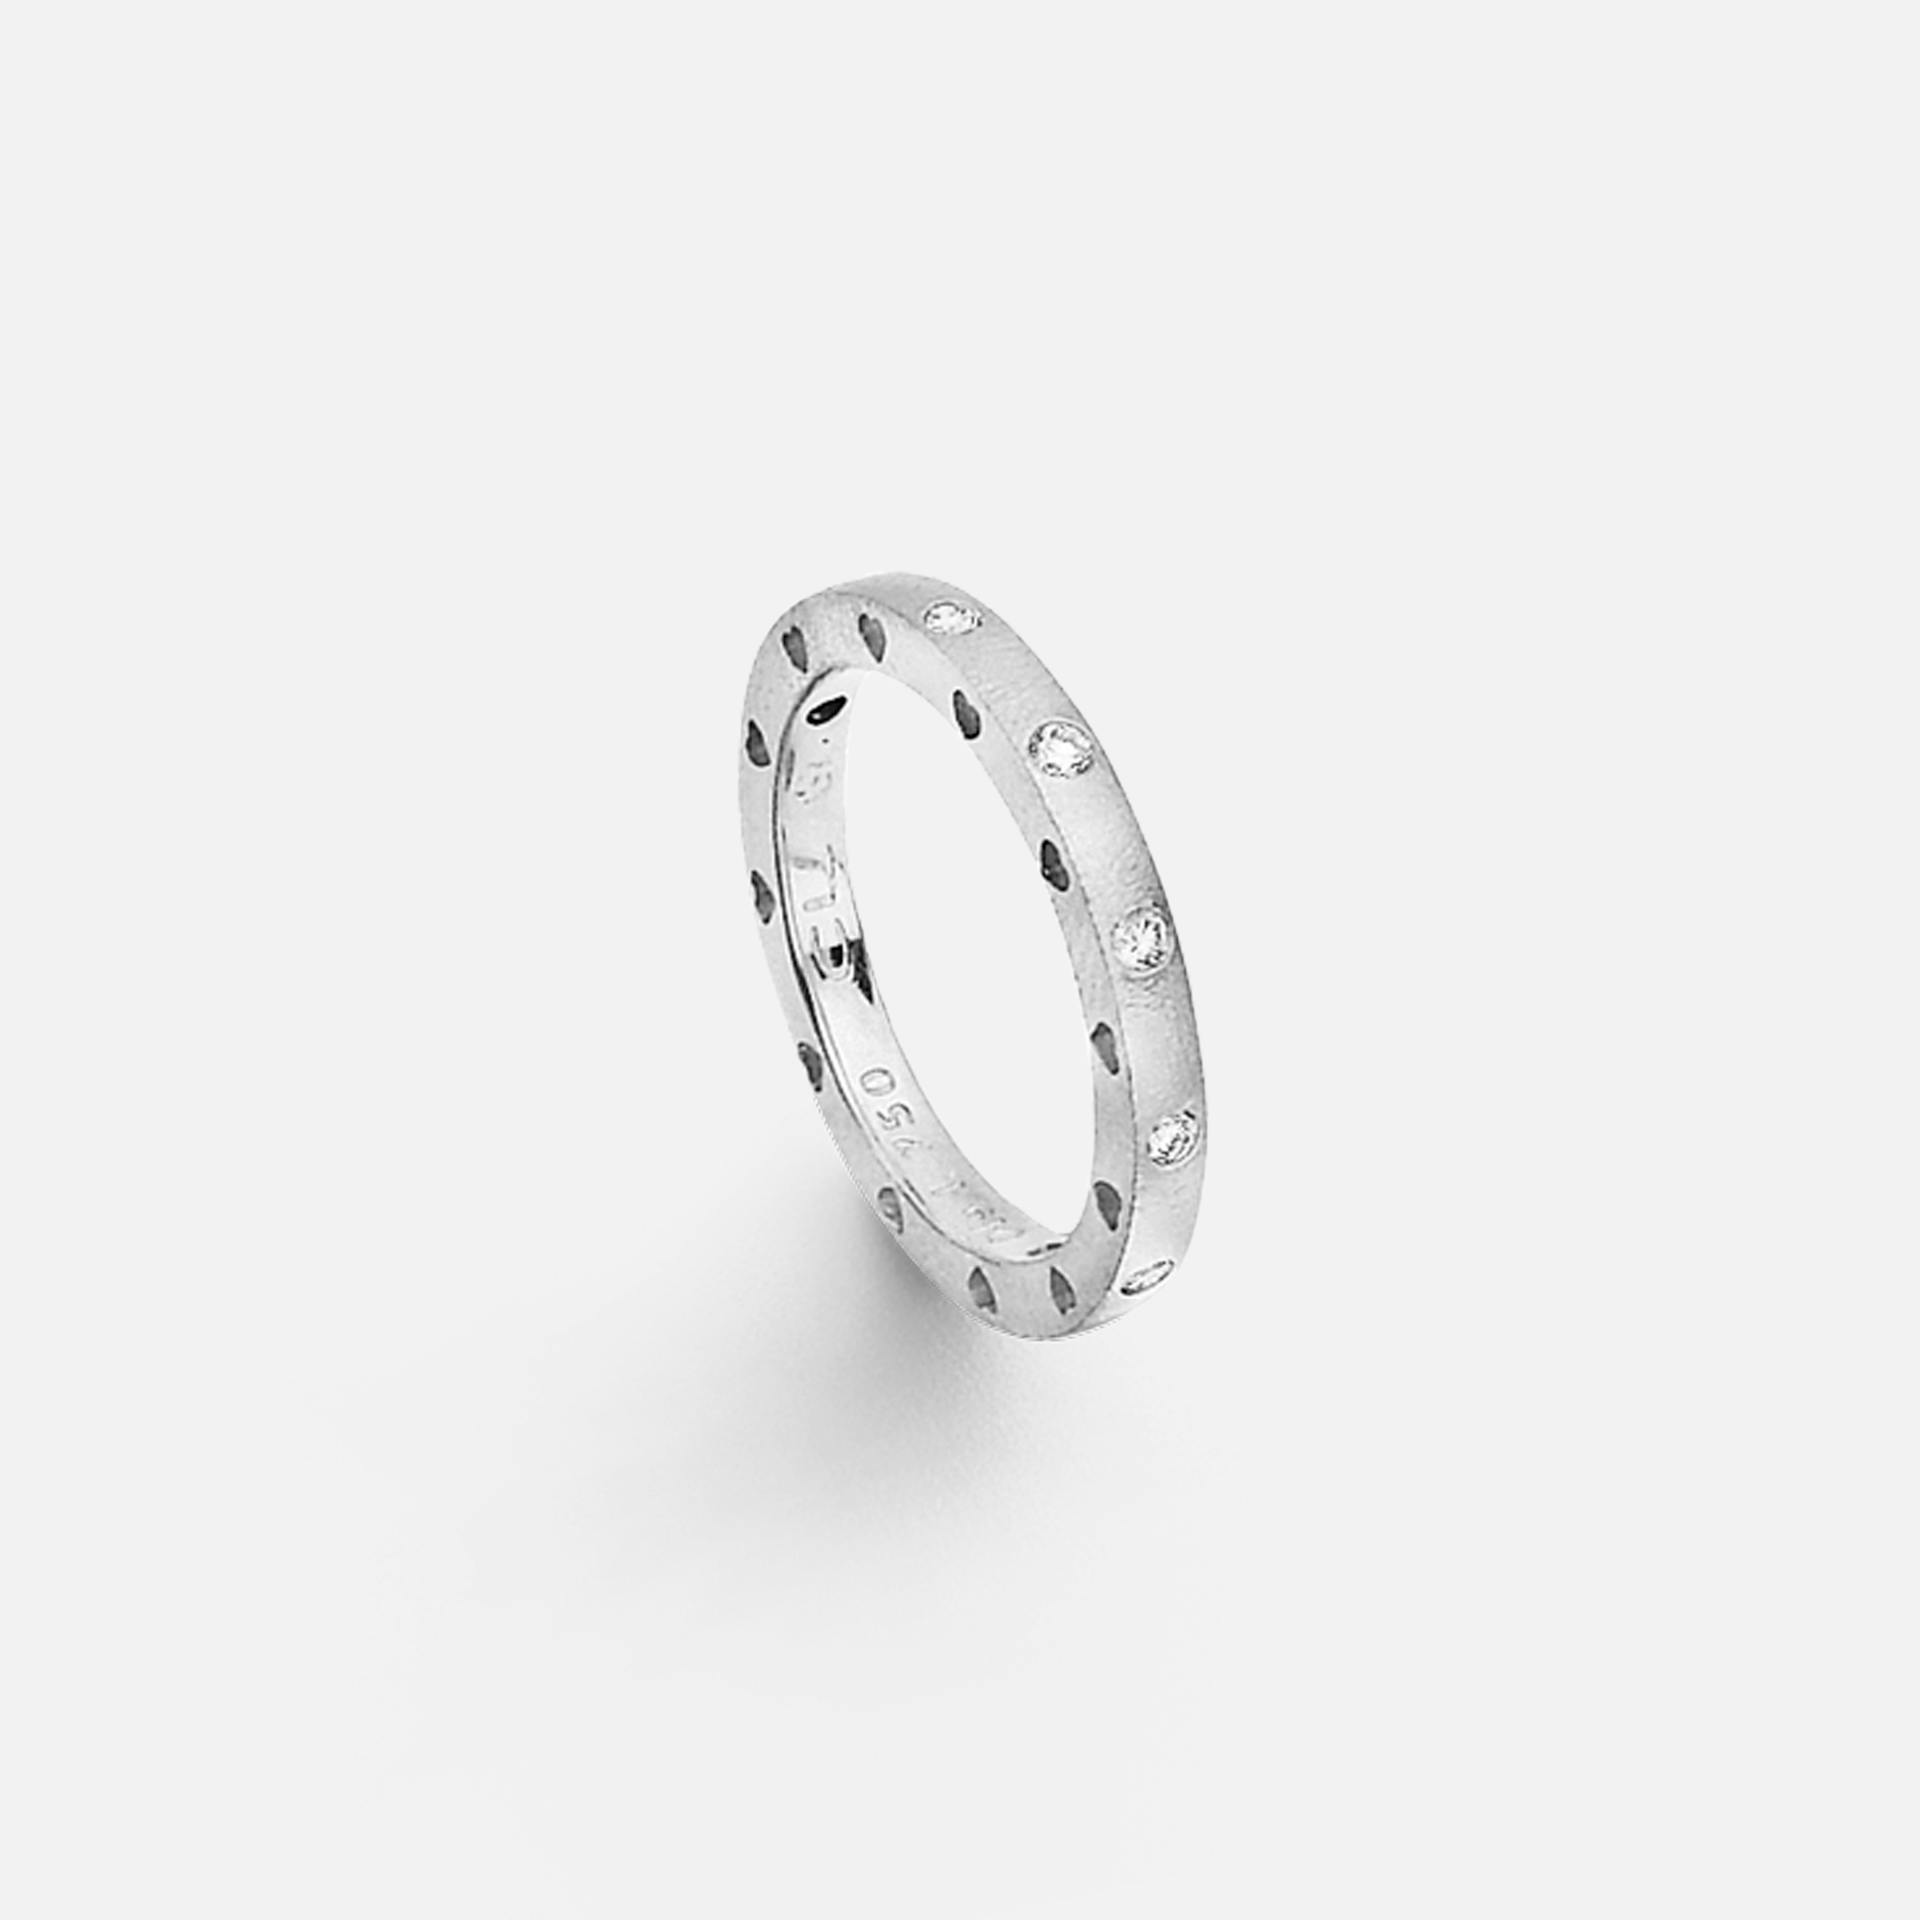 Forever Love Ring in Textured White Gold with Diamonds  |  Ole Lynggaard Copenhagen